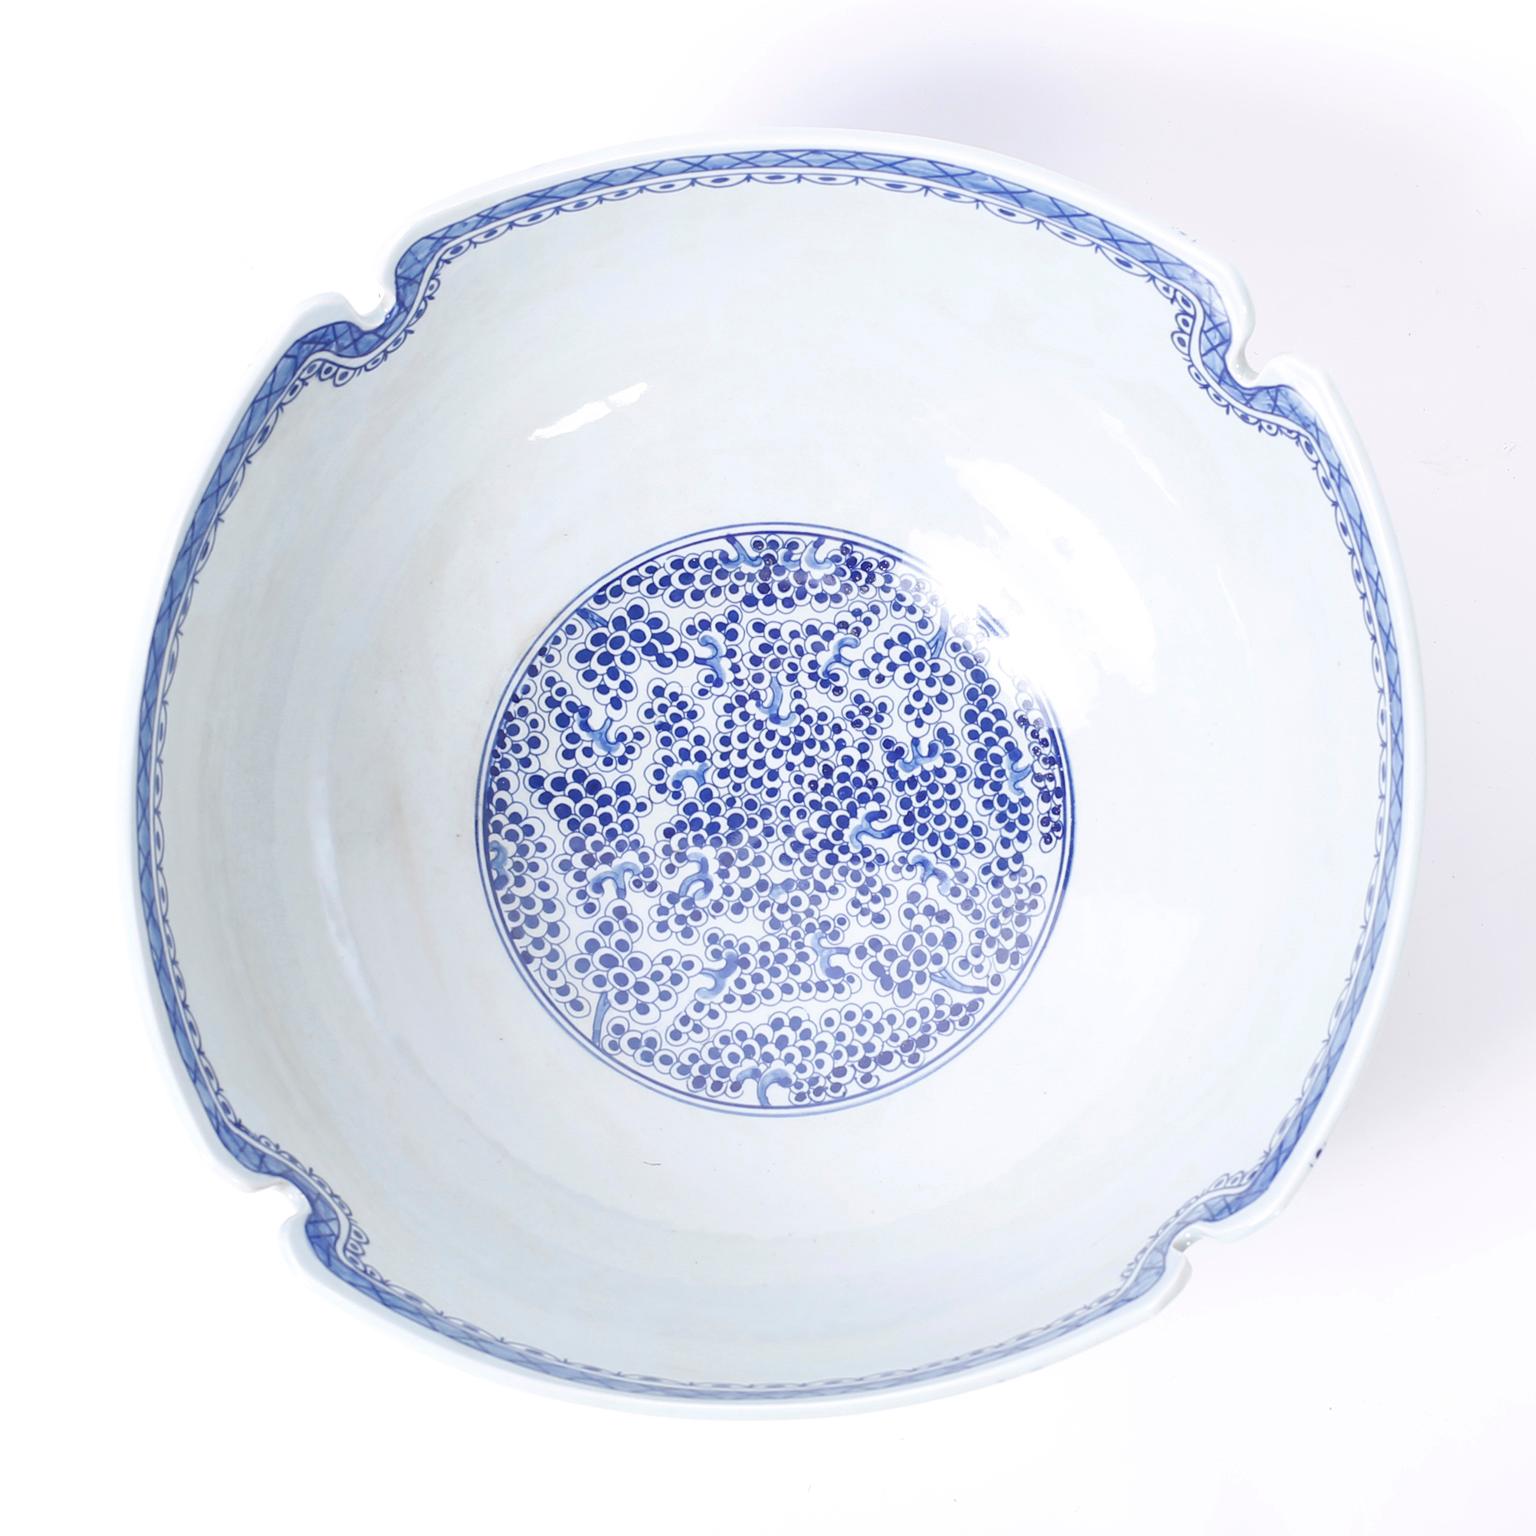 Blue and White Porcelain Fruit Bowl (Chinesisch)